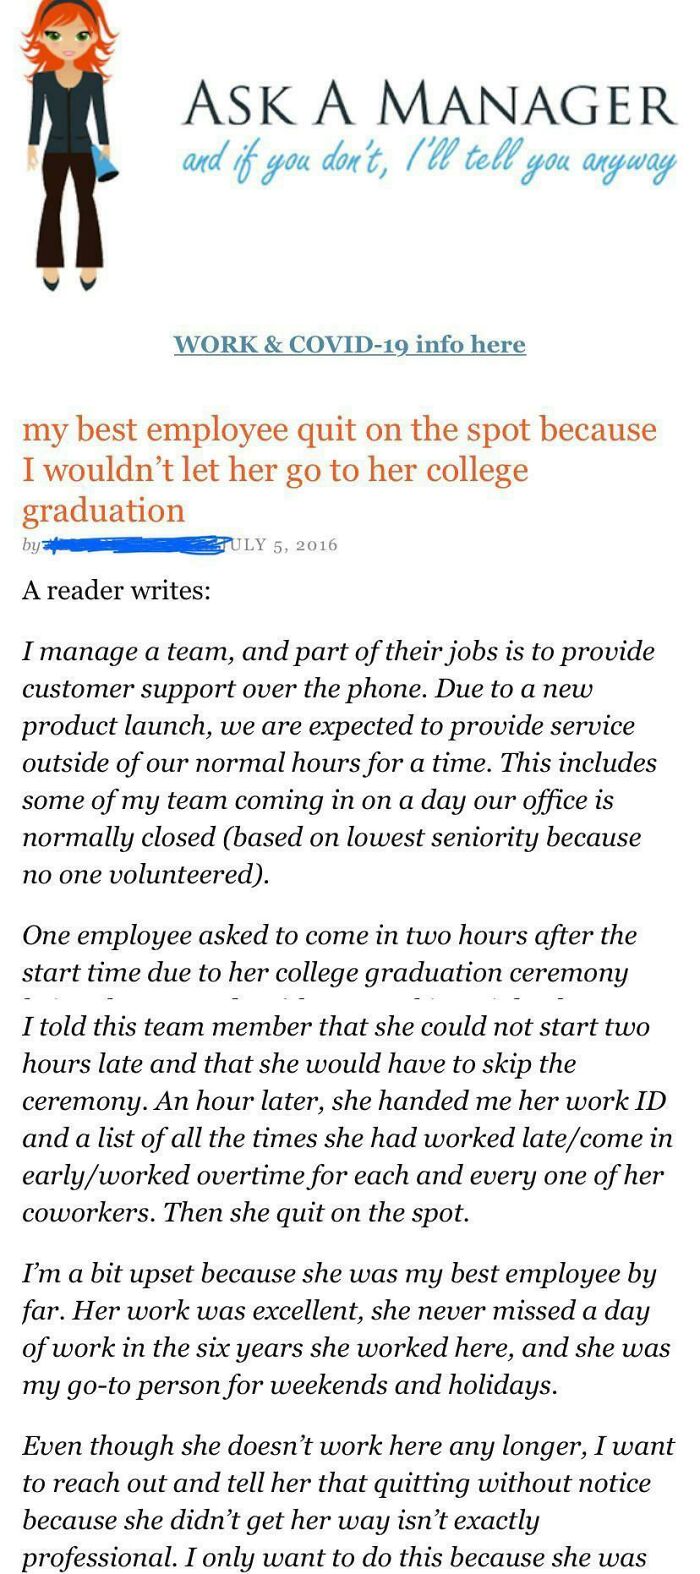 Manager Refuses To Allow Employee To Go To College Graduation Ceremony